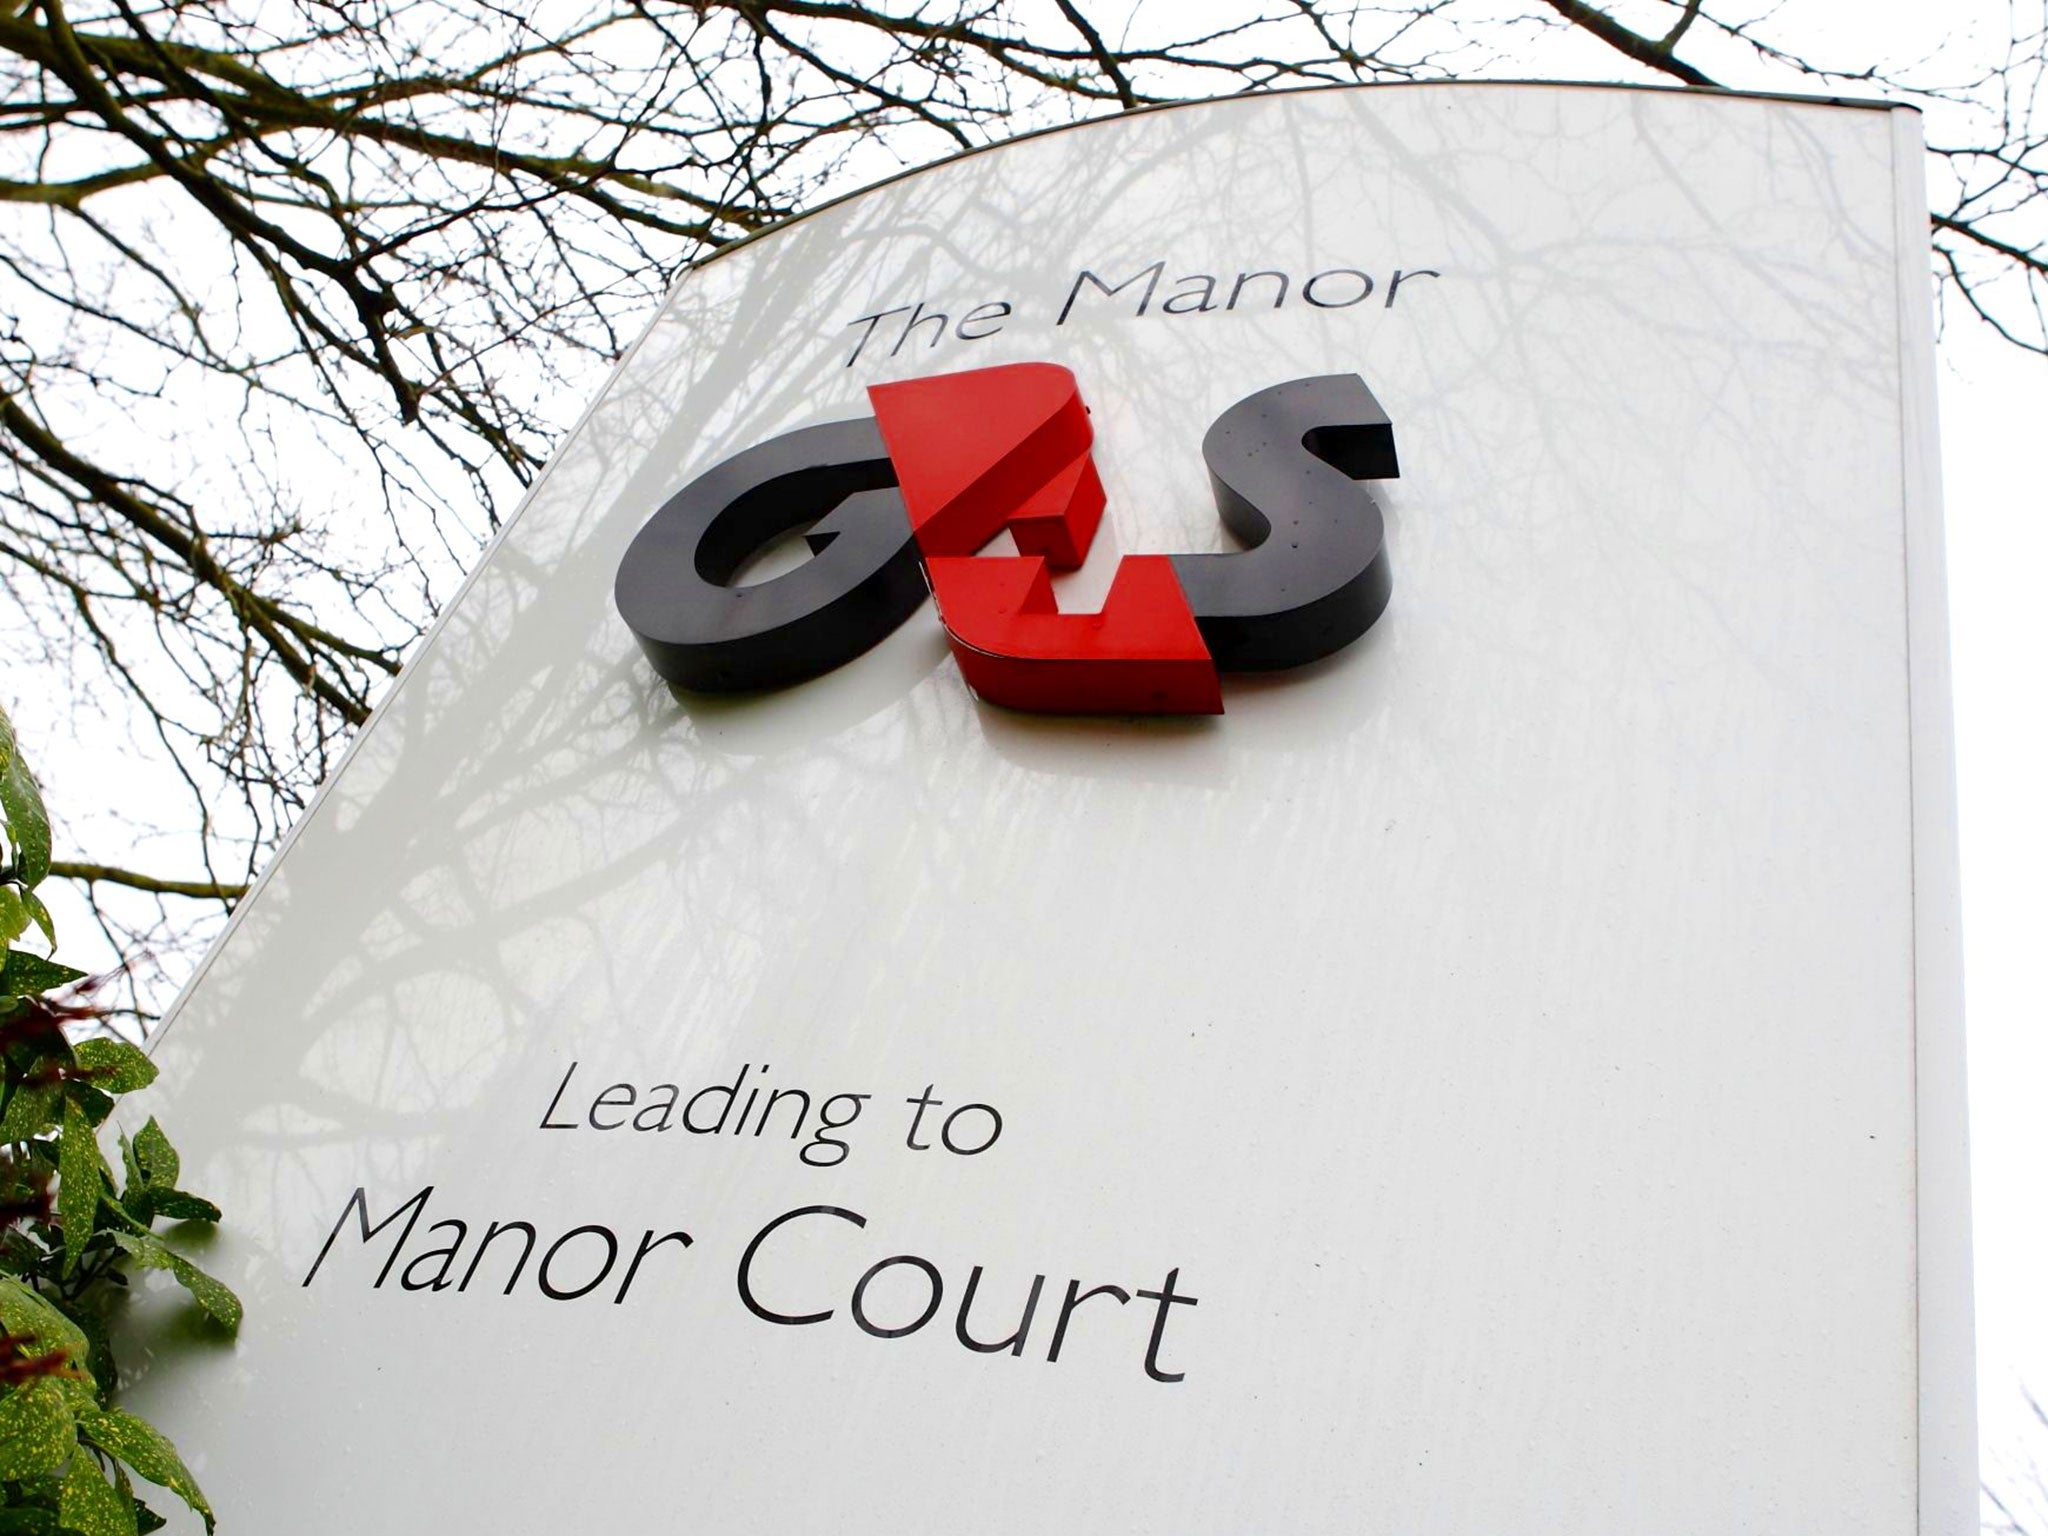 Migrant workers were found to have taken out loans to pay “recruitment fees” of as much as $1,800 (£1,400) to work for G4S